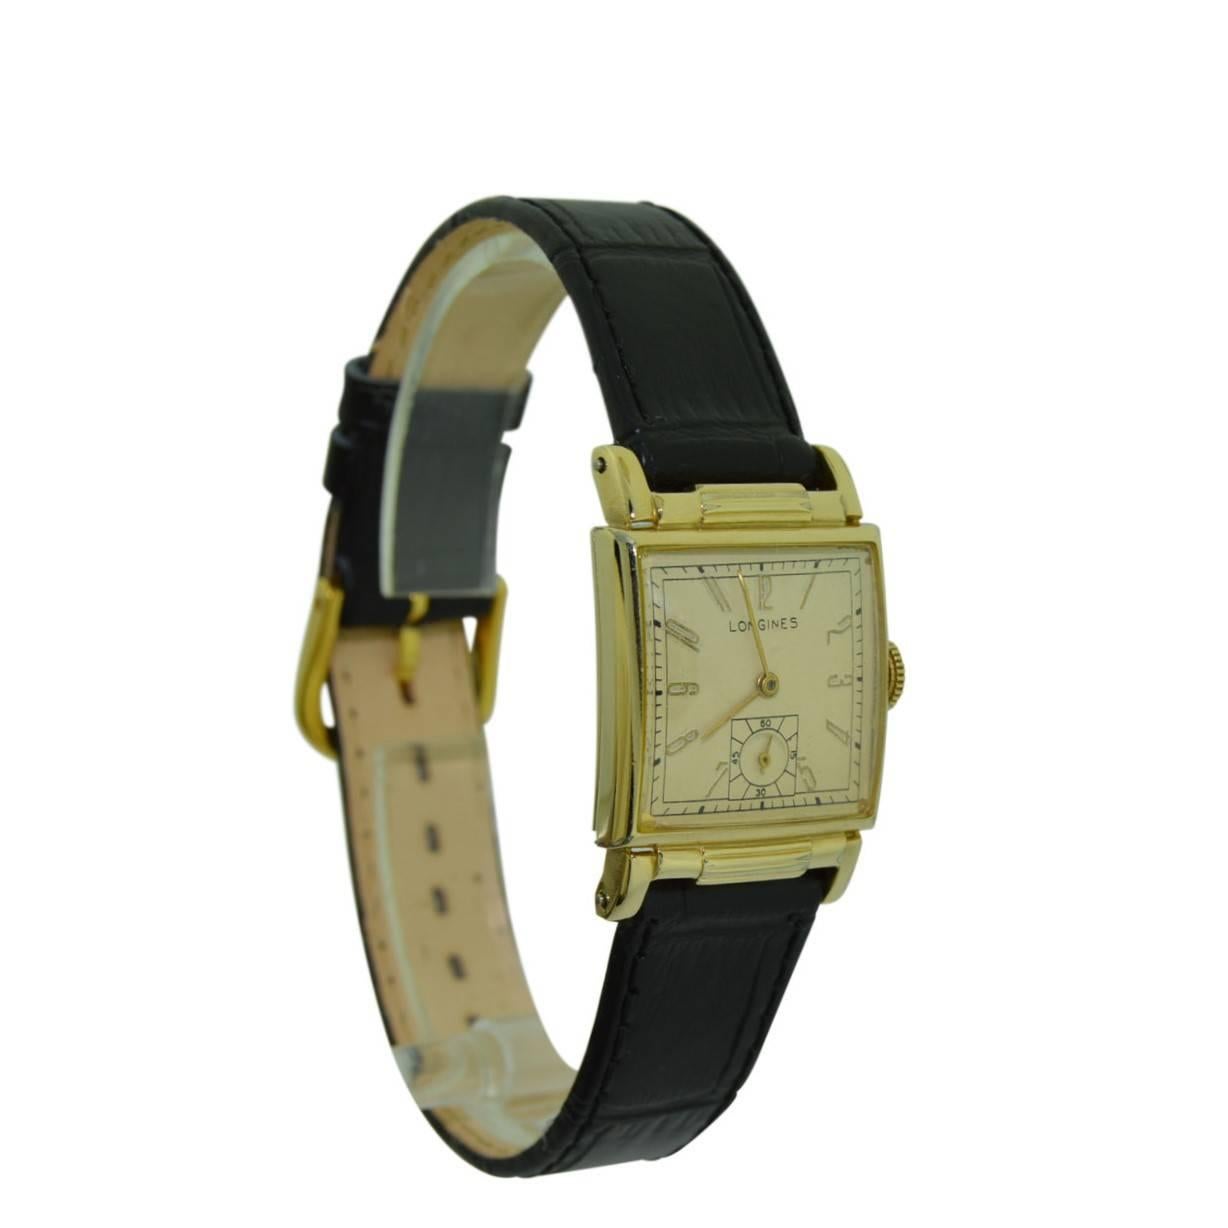 FACTORY / HOUSE:  Longines Watch Company
STYLE / REFERENCE: Art Deco 
METAL / MATERIAL:   14 Kt Yellow Gold Filled
DIMENSIONS:  34 mm  X 22 mm
CIRCA:  1940's
MOVEMENT / CALIBER:  Manual Winding / 17 Jewels / Cal. 8 lignes 
DIAL / HANDS: Original